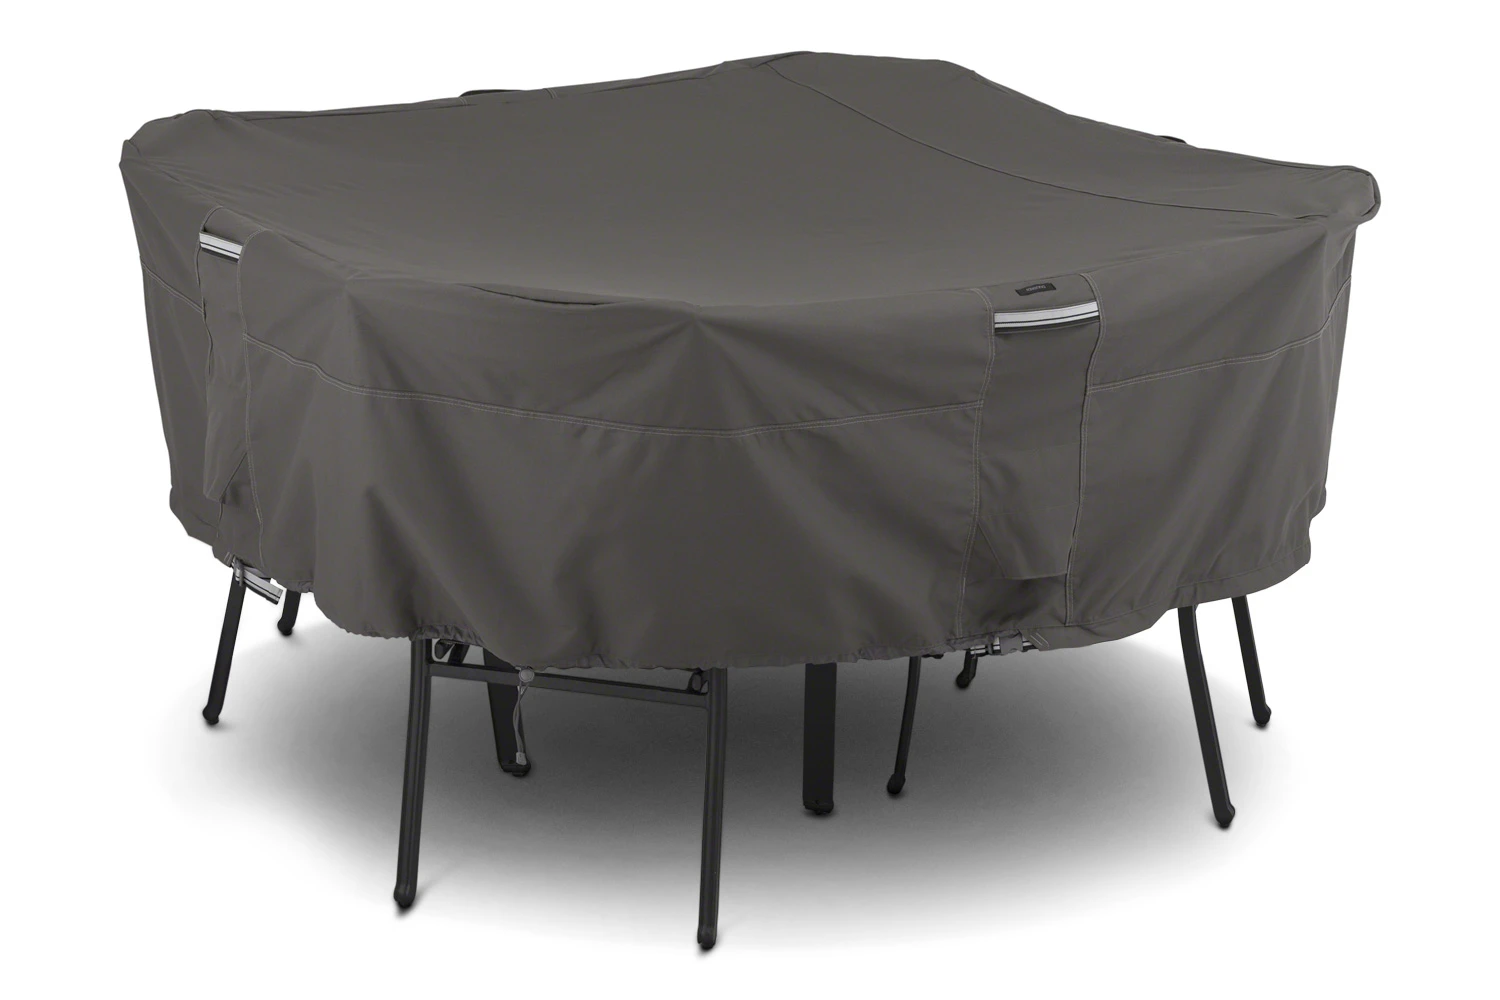 Classic Accessories 55-158-045101-EC Round Patio Table Cover for sale online 